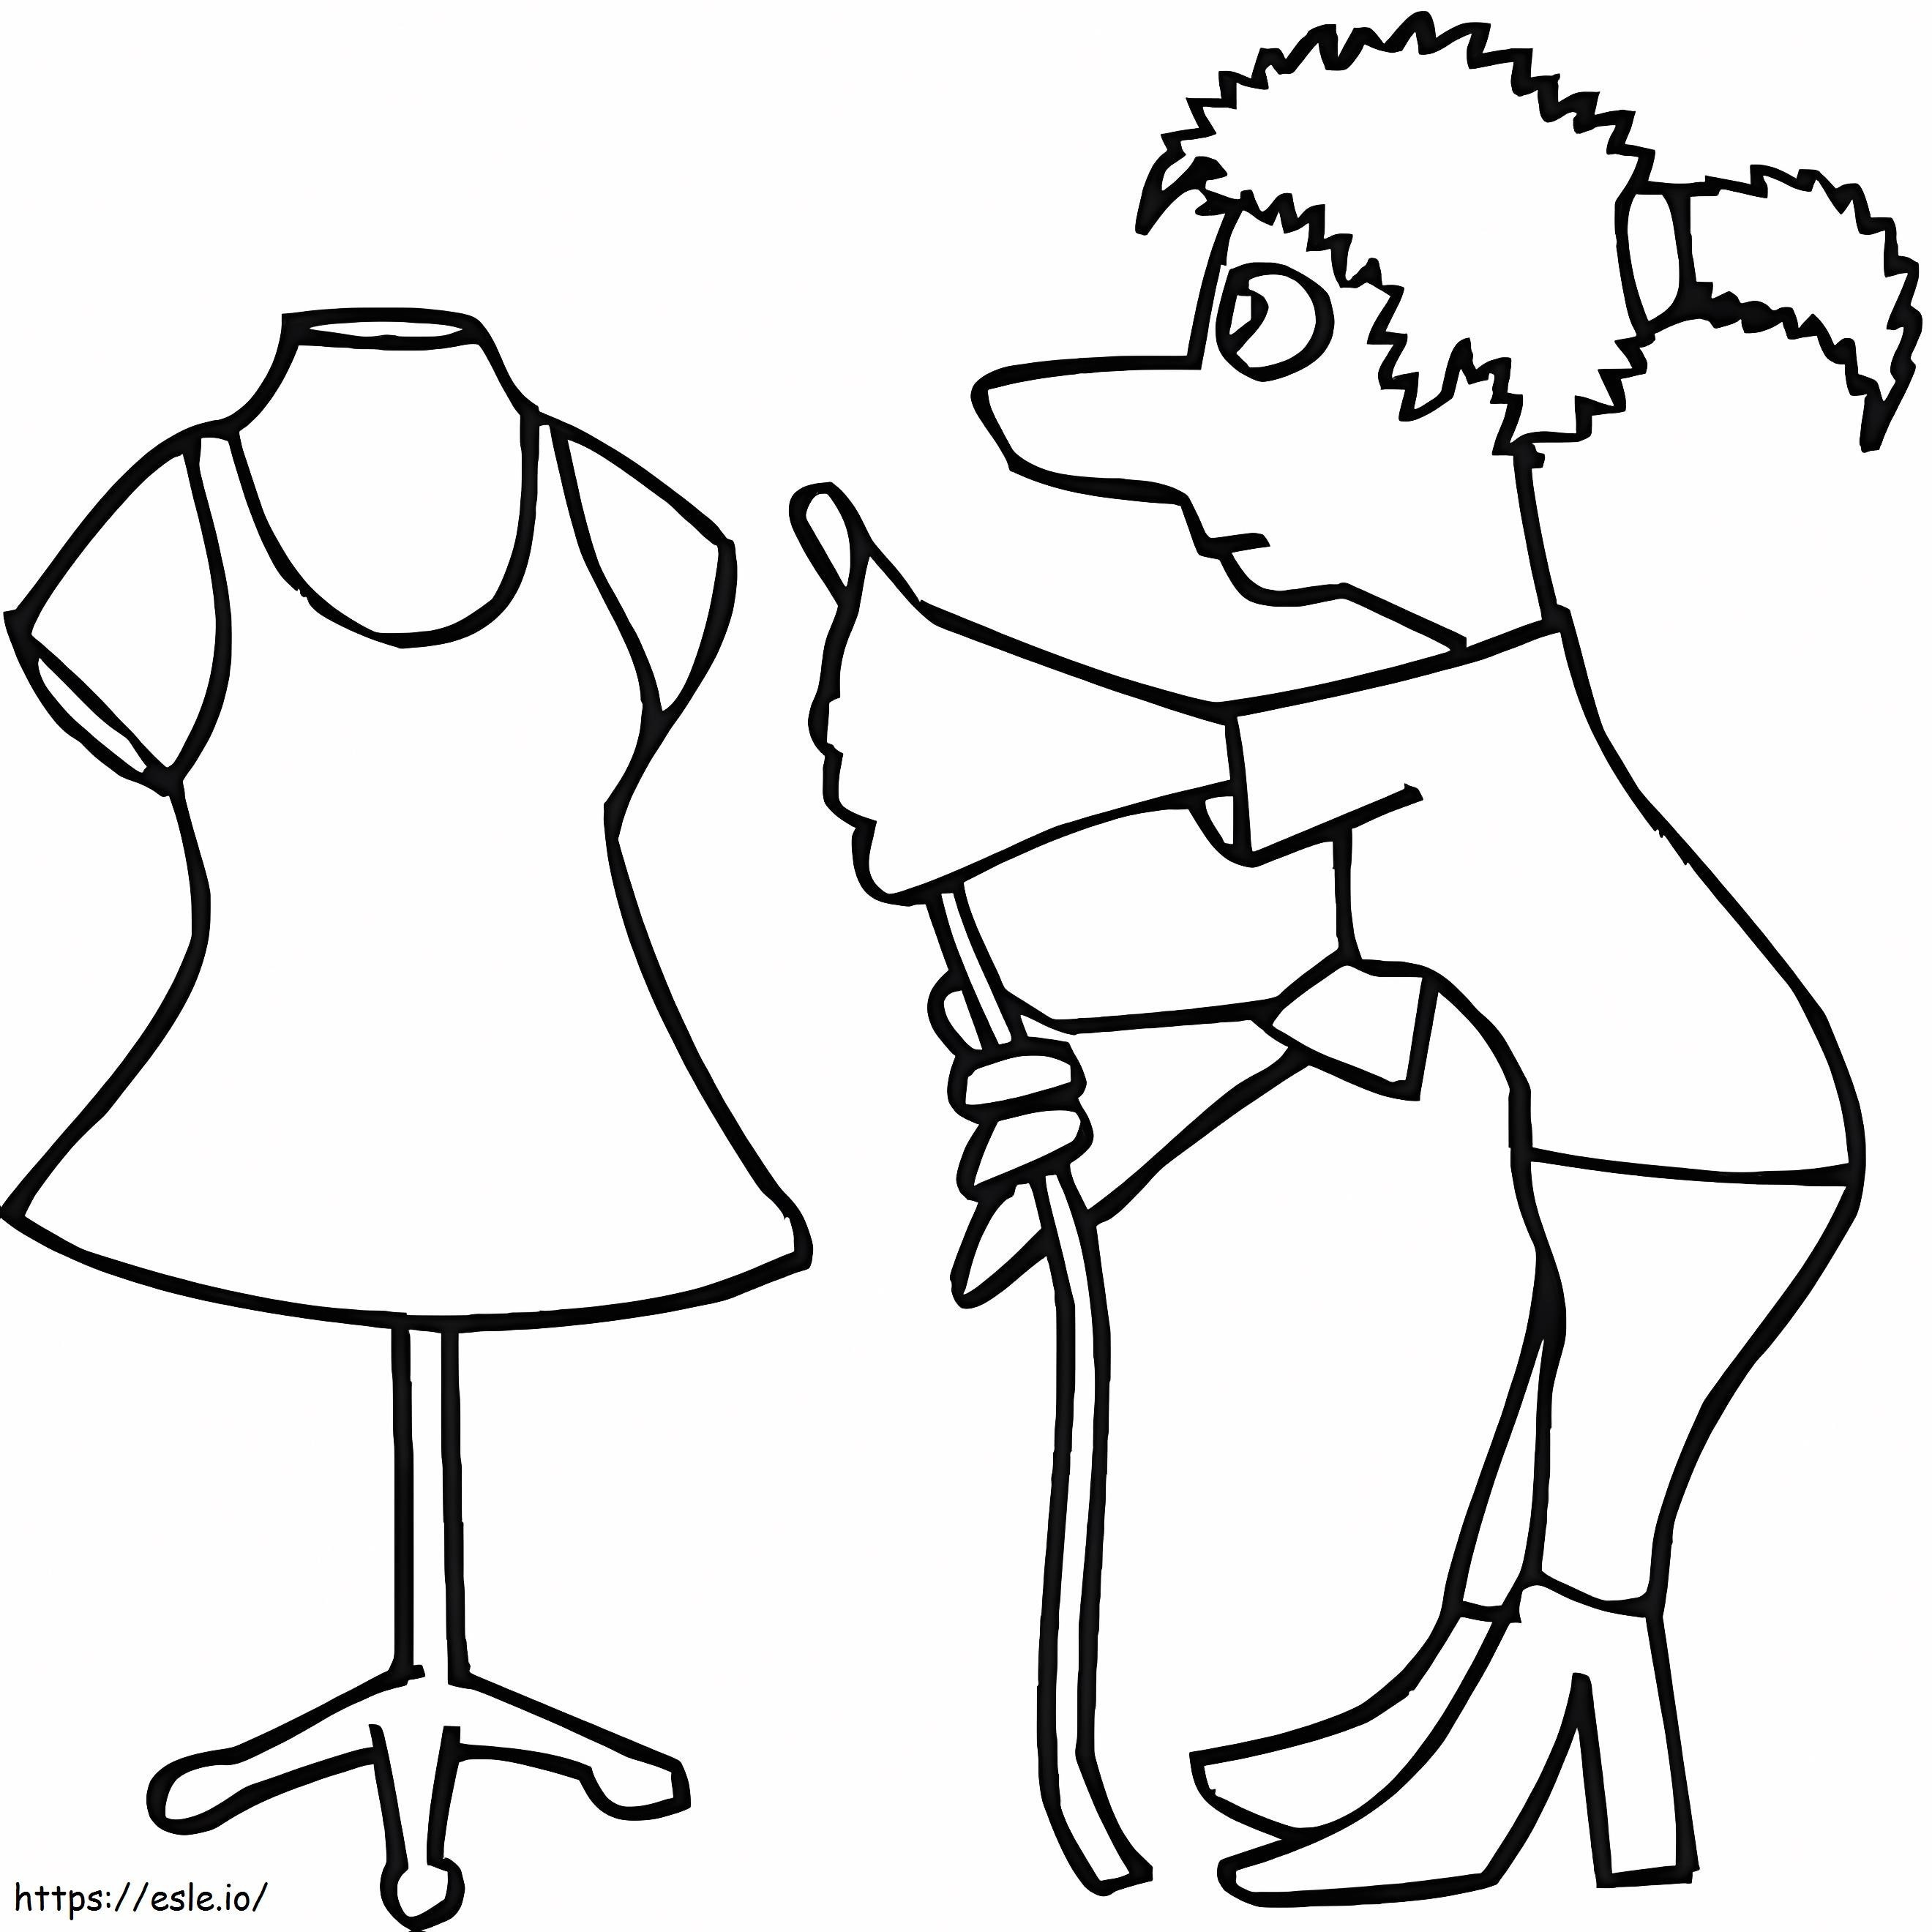 Tailor 10 coloring page